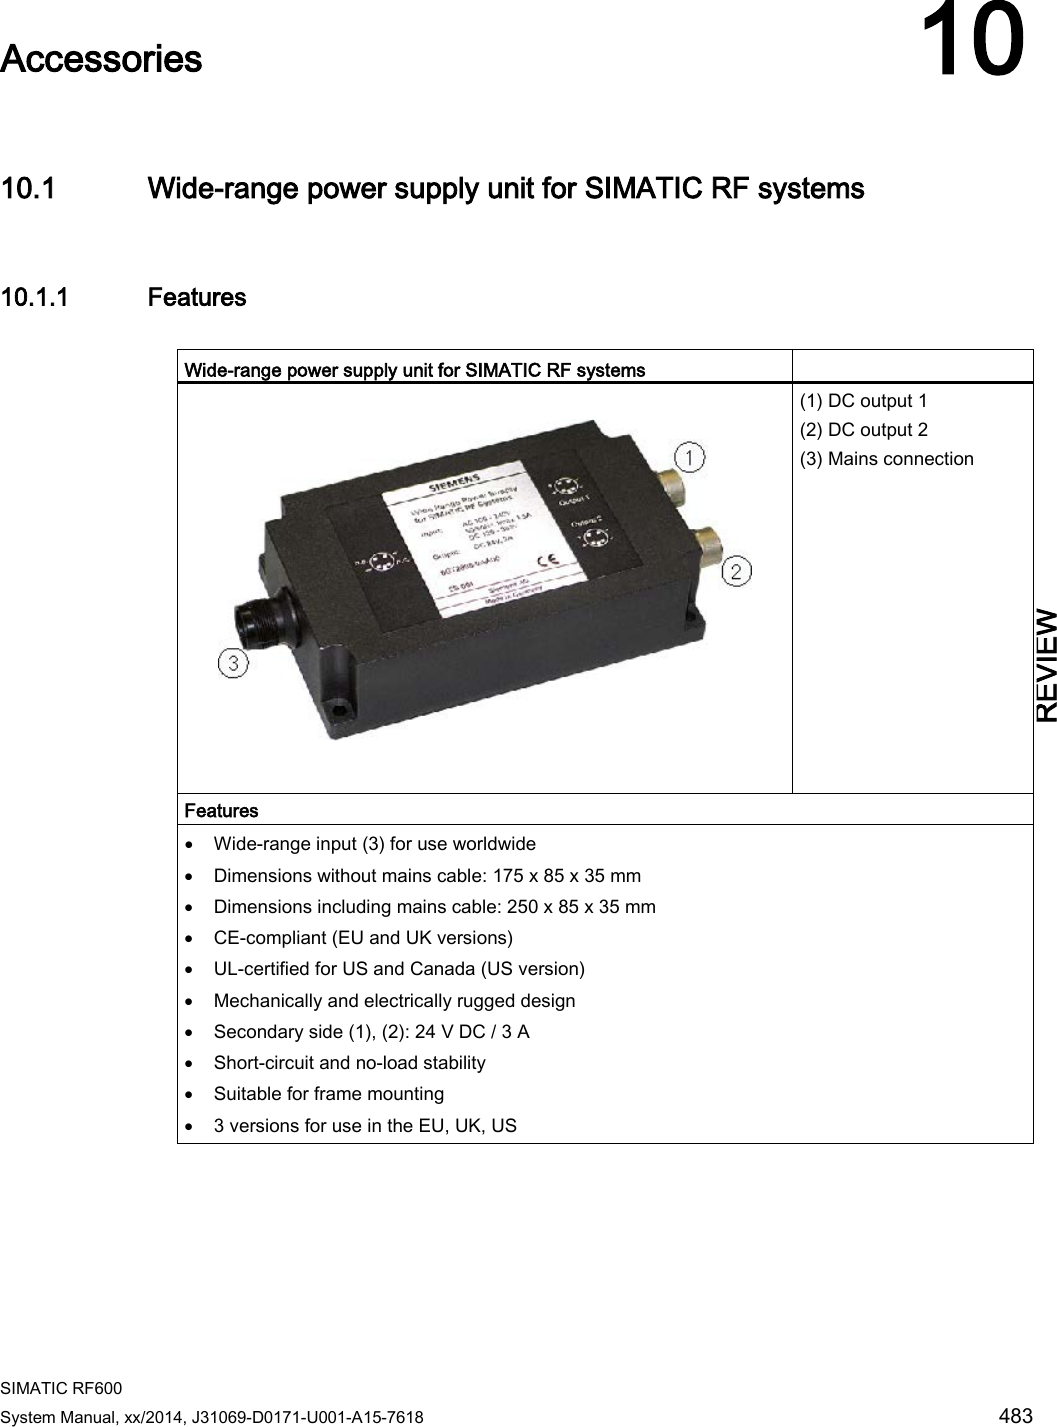  SIMATIC RF600 System Manual, xx/2014, J31069-D0171-U001-A15-7618 483 REVIEW  Accessories 10 10.1 Wide-range power supply unit for SIMATIC RF systems 10.1.1 Features  Wide-range power supply unit for SIMATIC RF systems      (1) DC output 1 (2) DC output 2 (3) Mains connection Features • Wide-range input (3) for use worldwide • Dimensions without mains cable: 175 x 85 x 35 mm • Dimensions including mains cable: 250 x 85 x 35 mm • CE-compliant (EU and UK versions) • UL-certified for US and Canada (US version) • Mechanically and electrically rugged design • Secondary side (1), (2): 24 V DC / 3 A • Short-circuit and no-load stability • Suitable for frame mounting • 3 versions for use in the EU, UK, US 